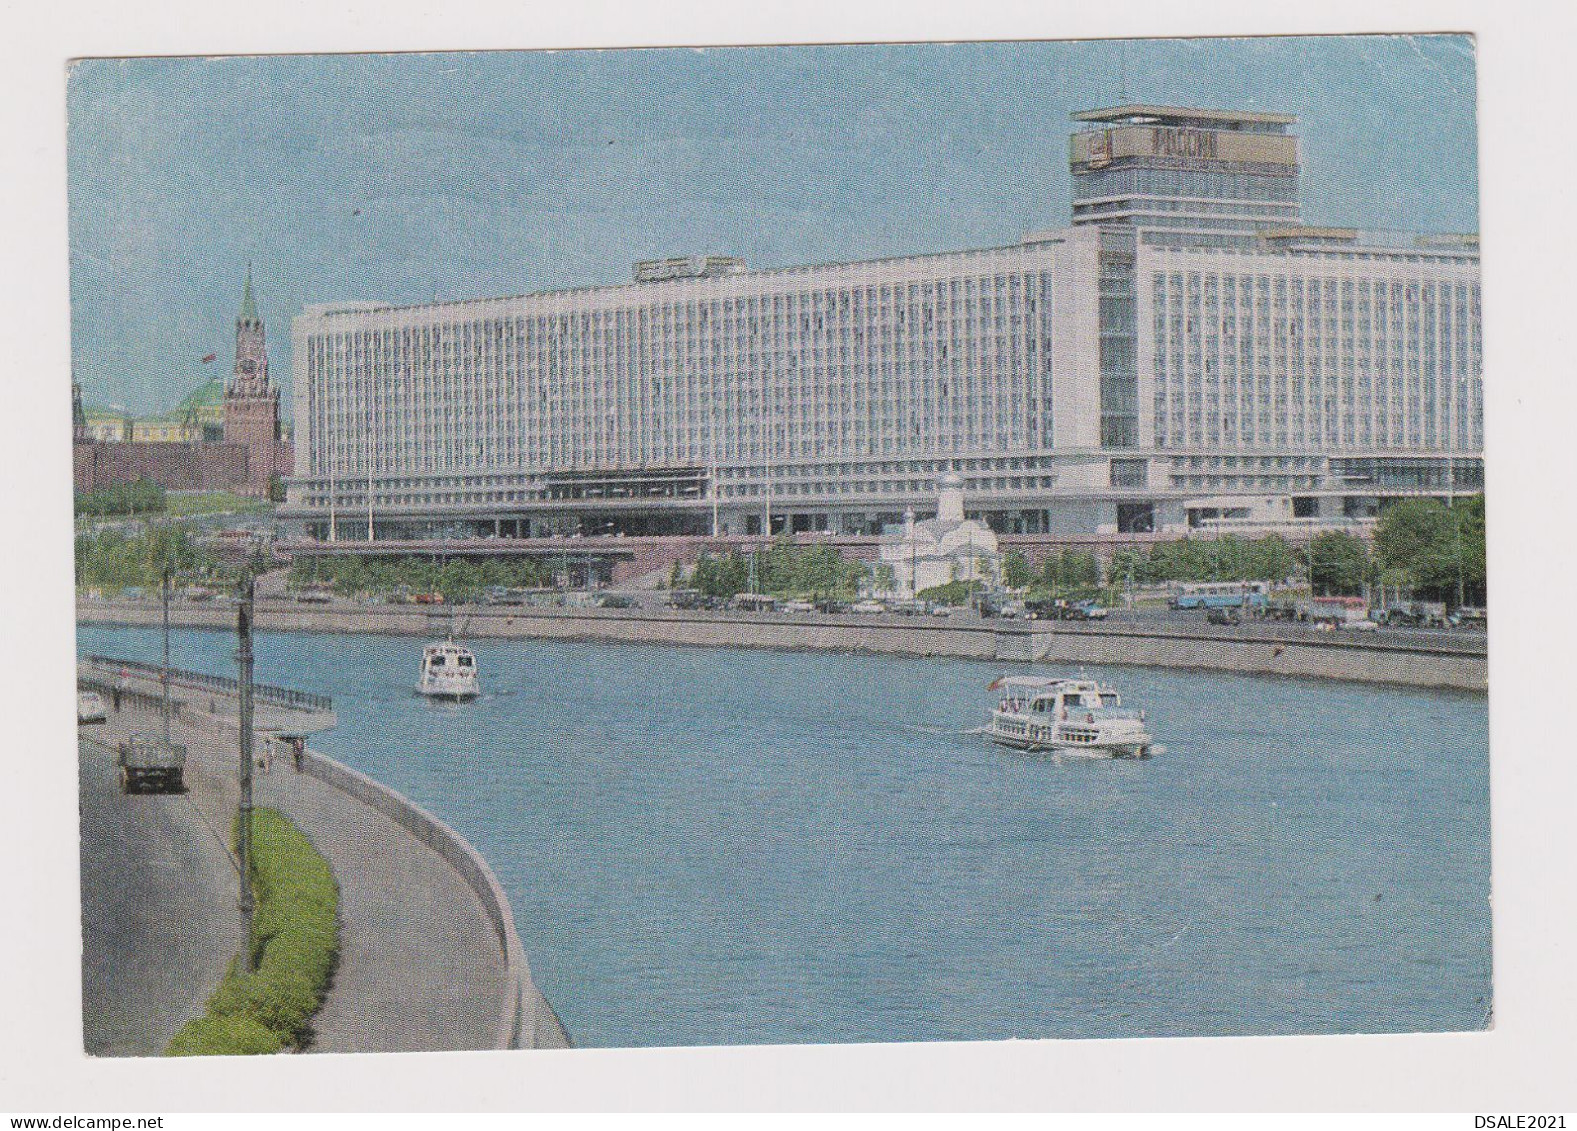 Russia USSR, 1970s Postal Stationery Card PSC, Entier, Ganzachen, MOSCOW View Hotel "RUSSIA", Sent To Bulgaria (772) - 1970-79